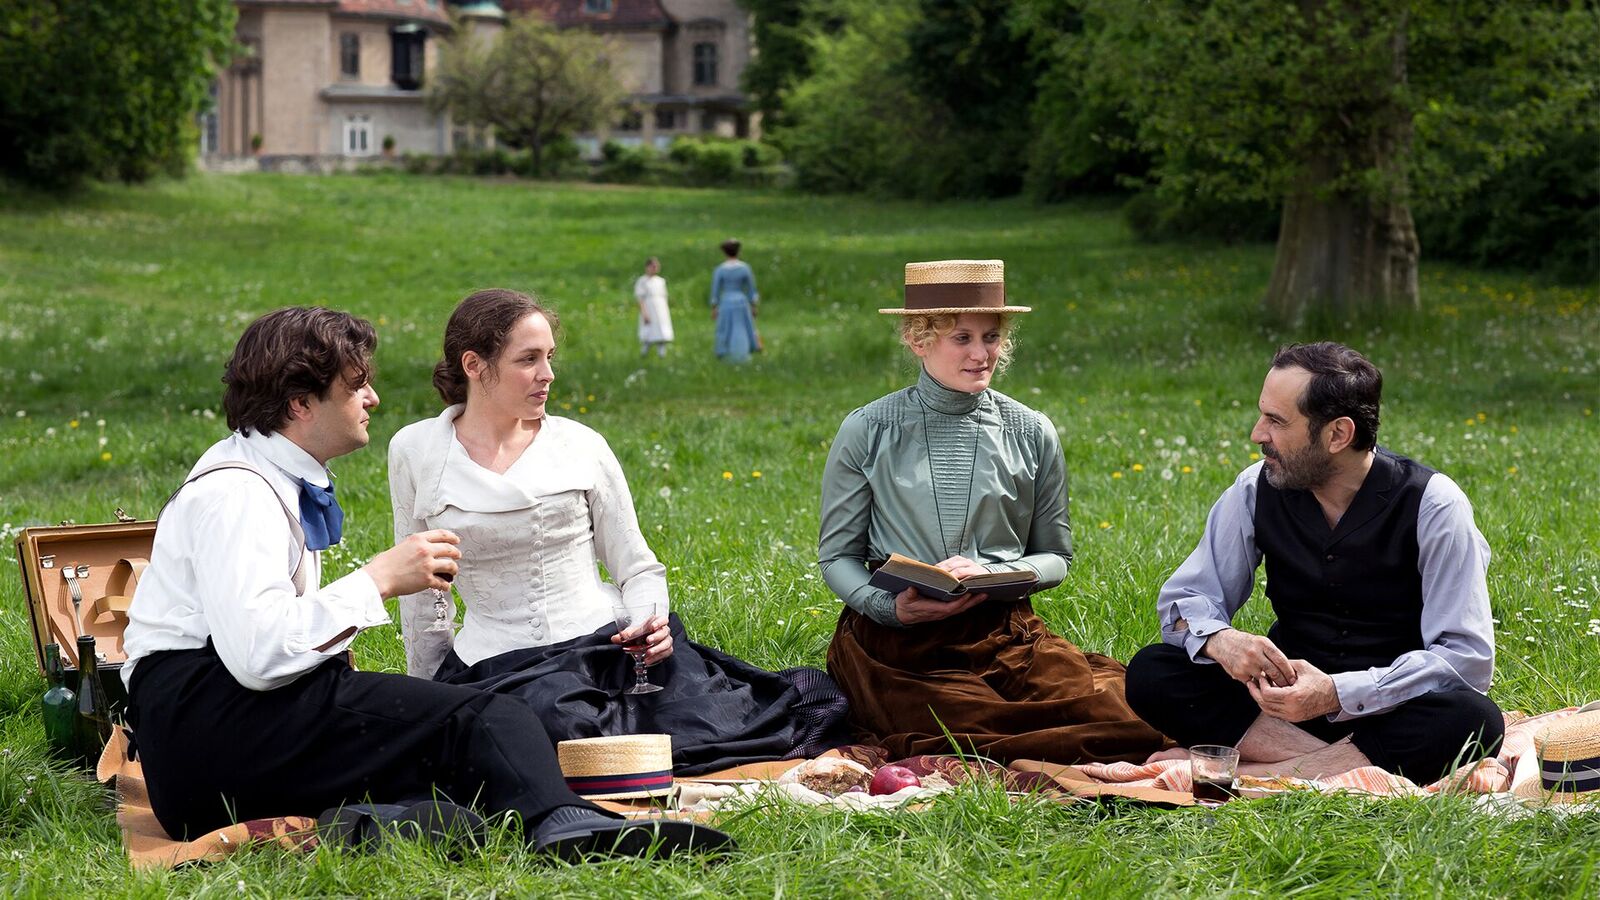 Lou Andreas-Salomé: The Audacity to Be Free - movie still